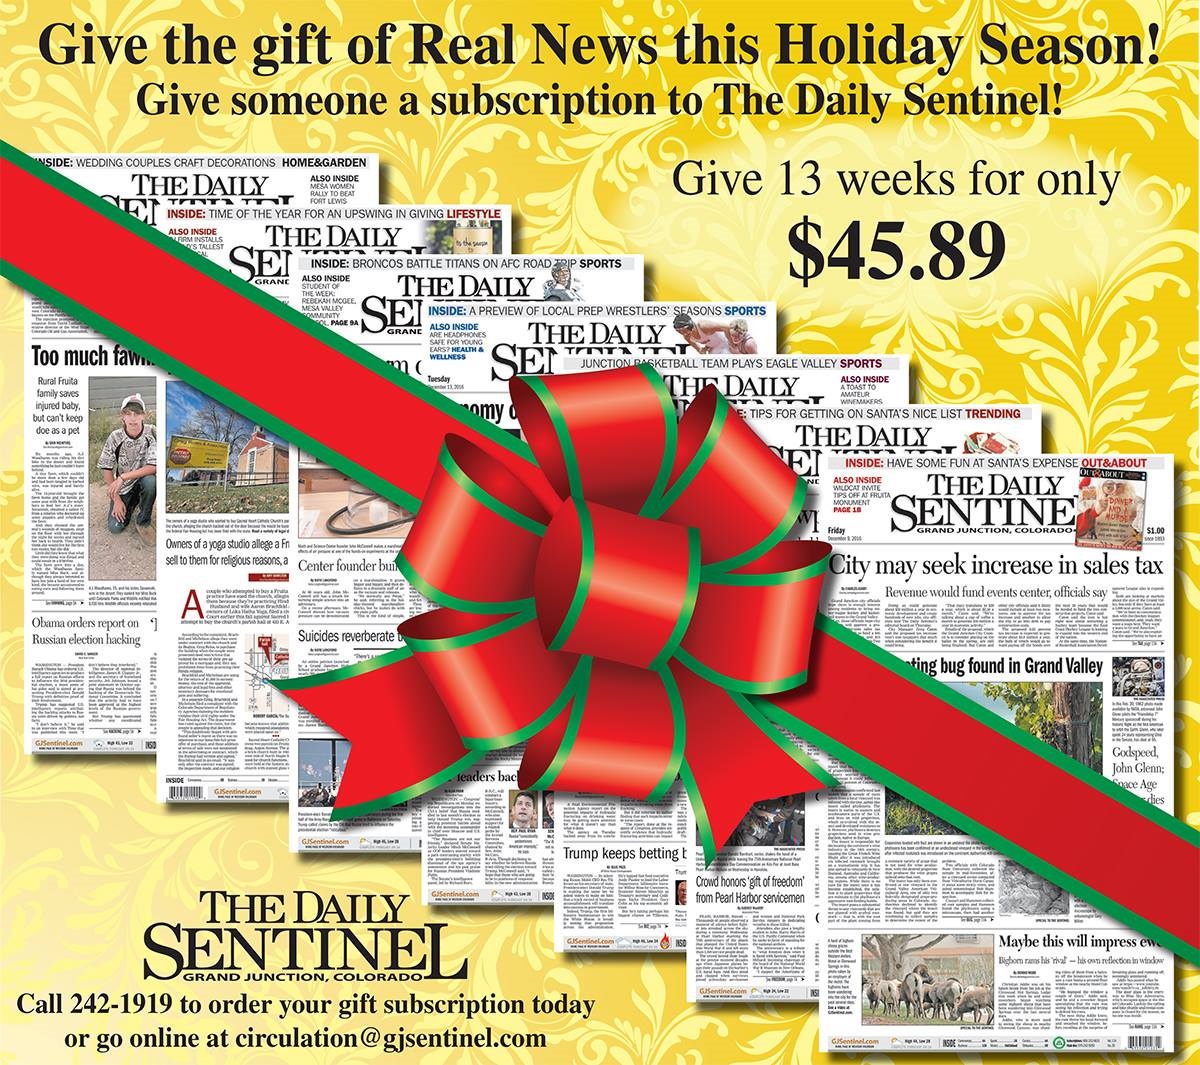 Idea #4 of 50 Days of Ideas! Give the gift of Real News!